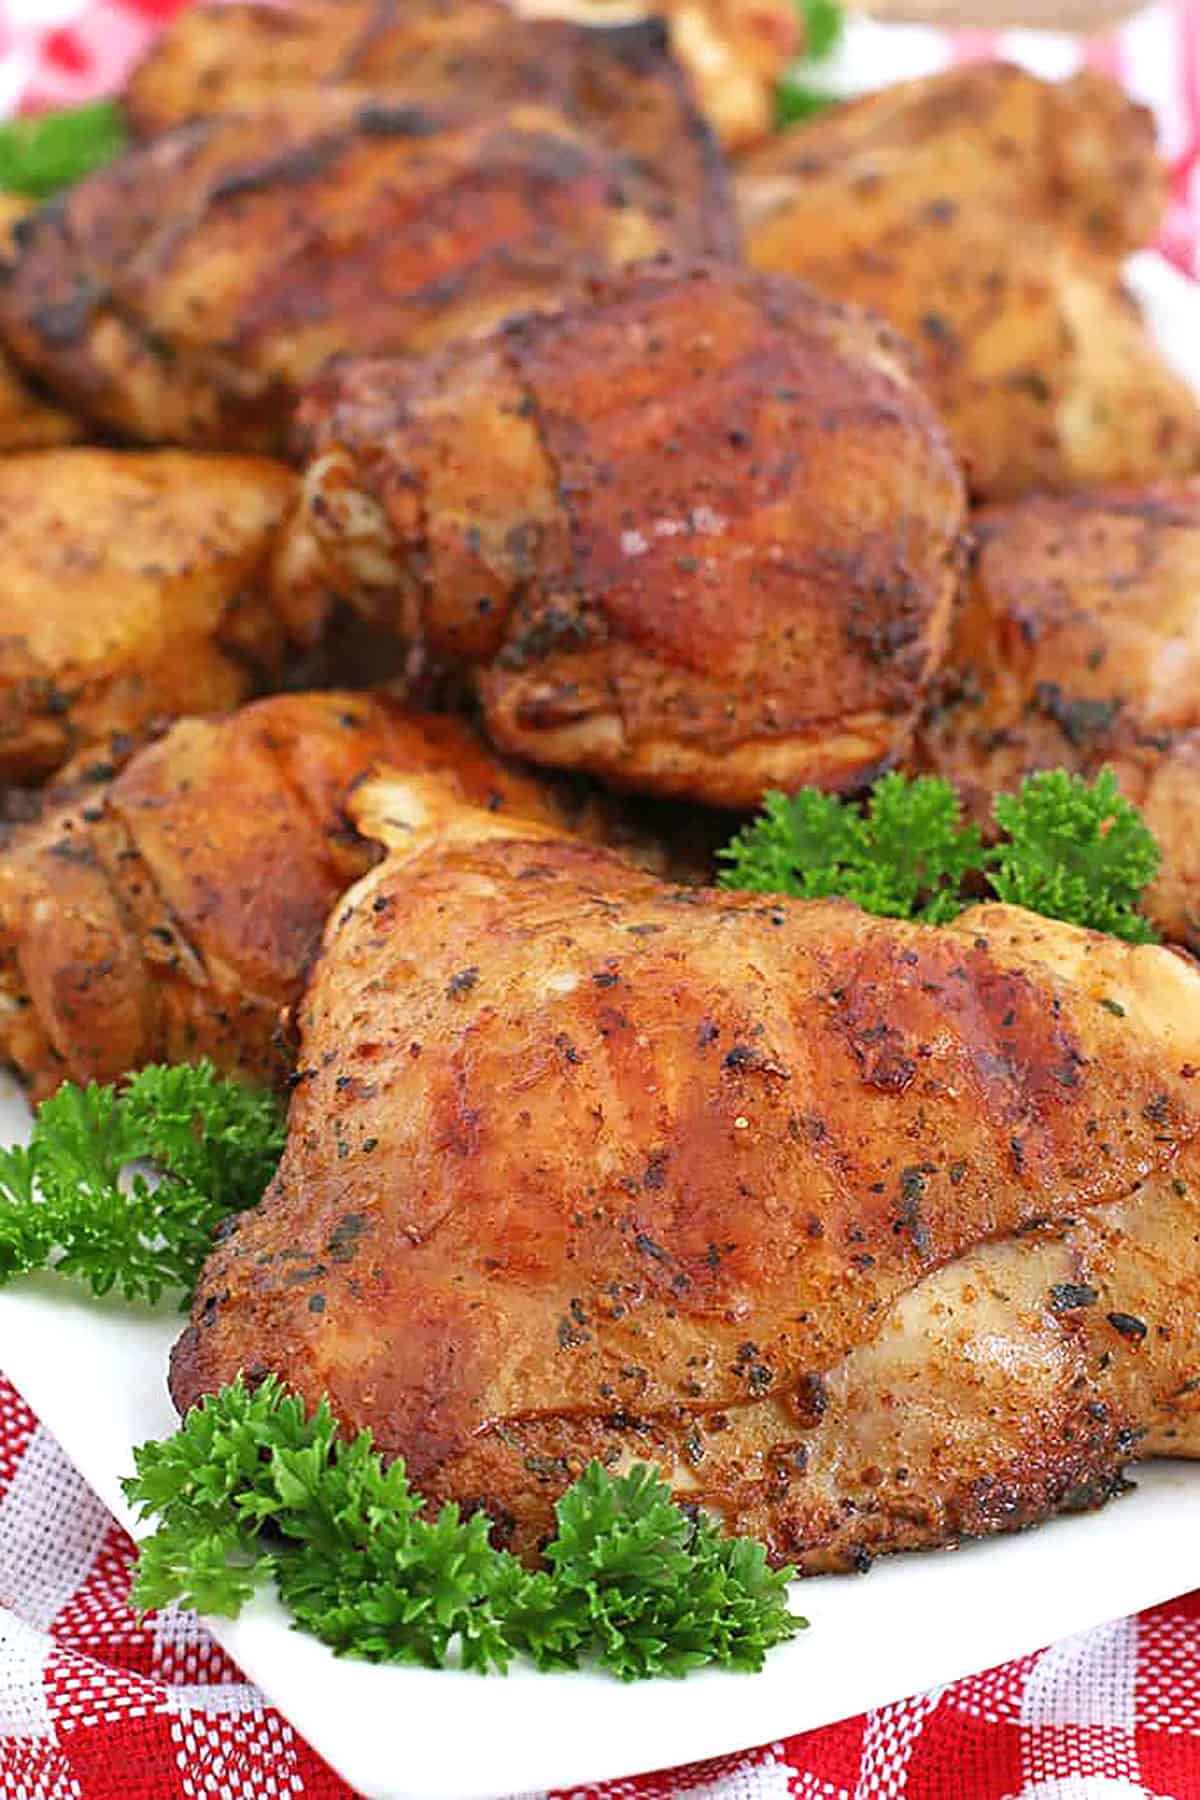 Grilling with skin on gives a deliciously crispy chicken on the outside, and juicy tender chicken on the inside.